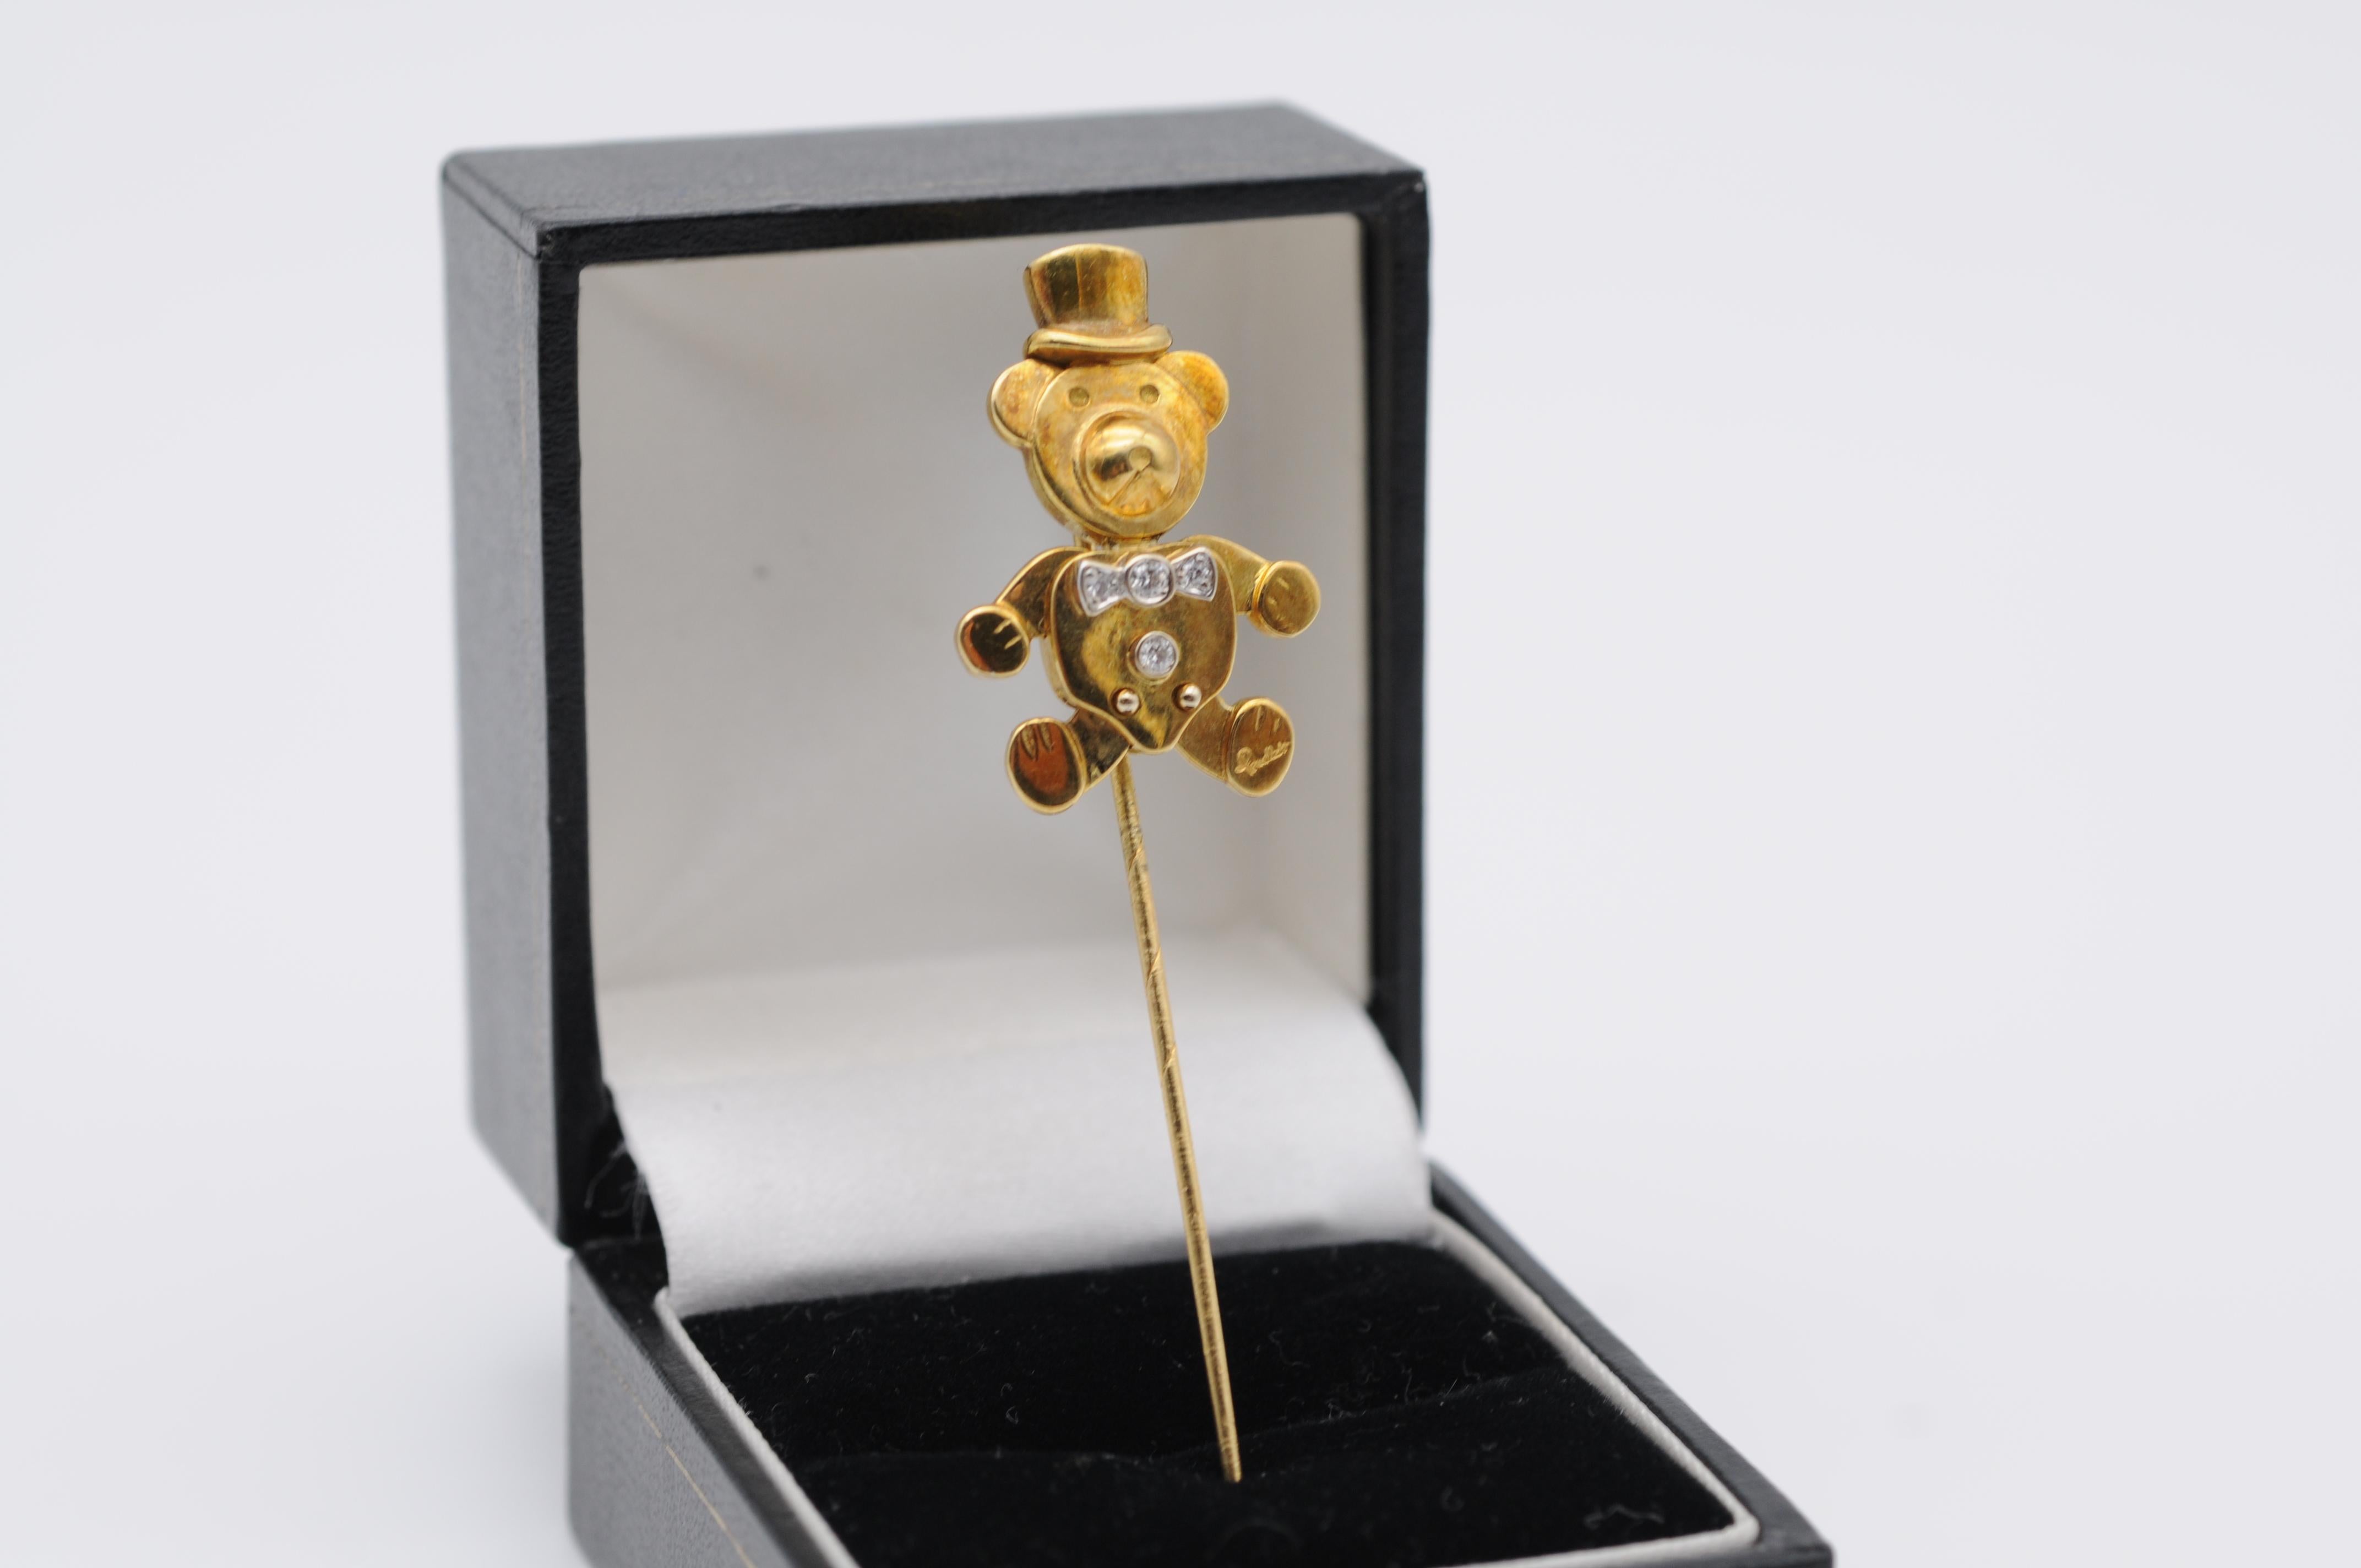 This exquisite Pomellato pin is a true work of art that exudes elegance and sophistication. Crafted from luxurious 18K yellow gold, this pin is part of the renowned Teddy Collection, a range of jewelry pieces that showcase Pomellato's exceptional